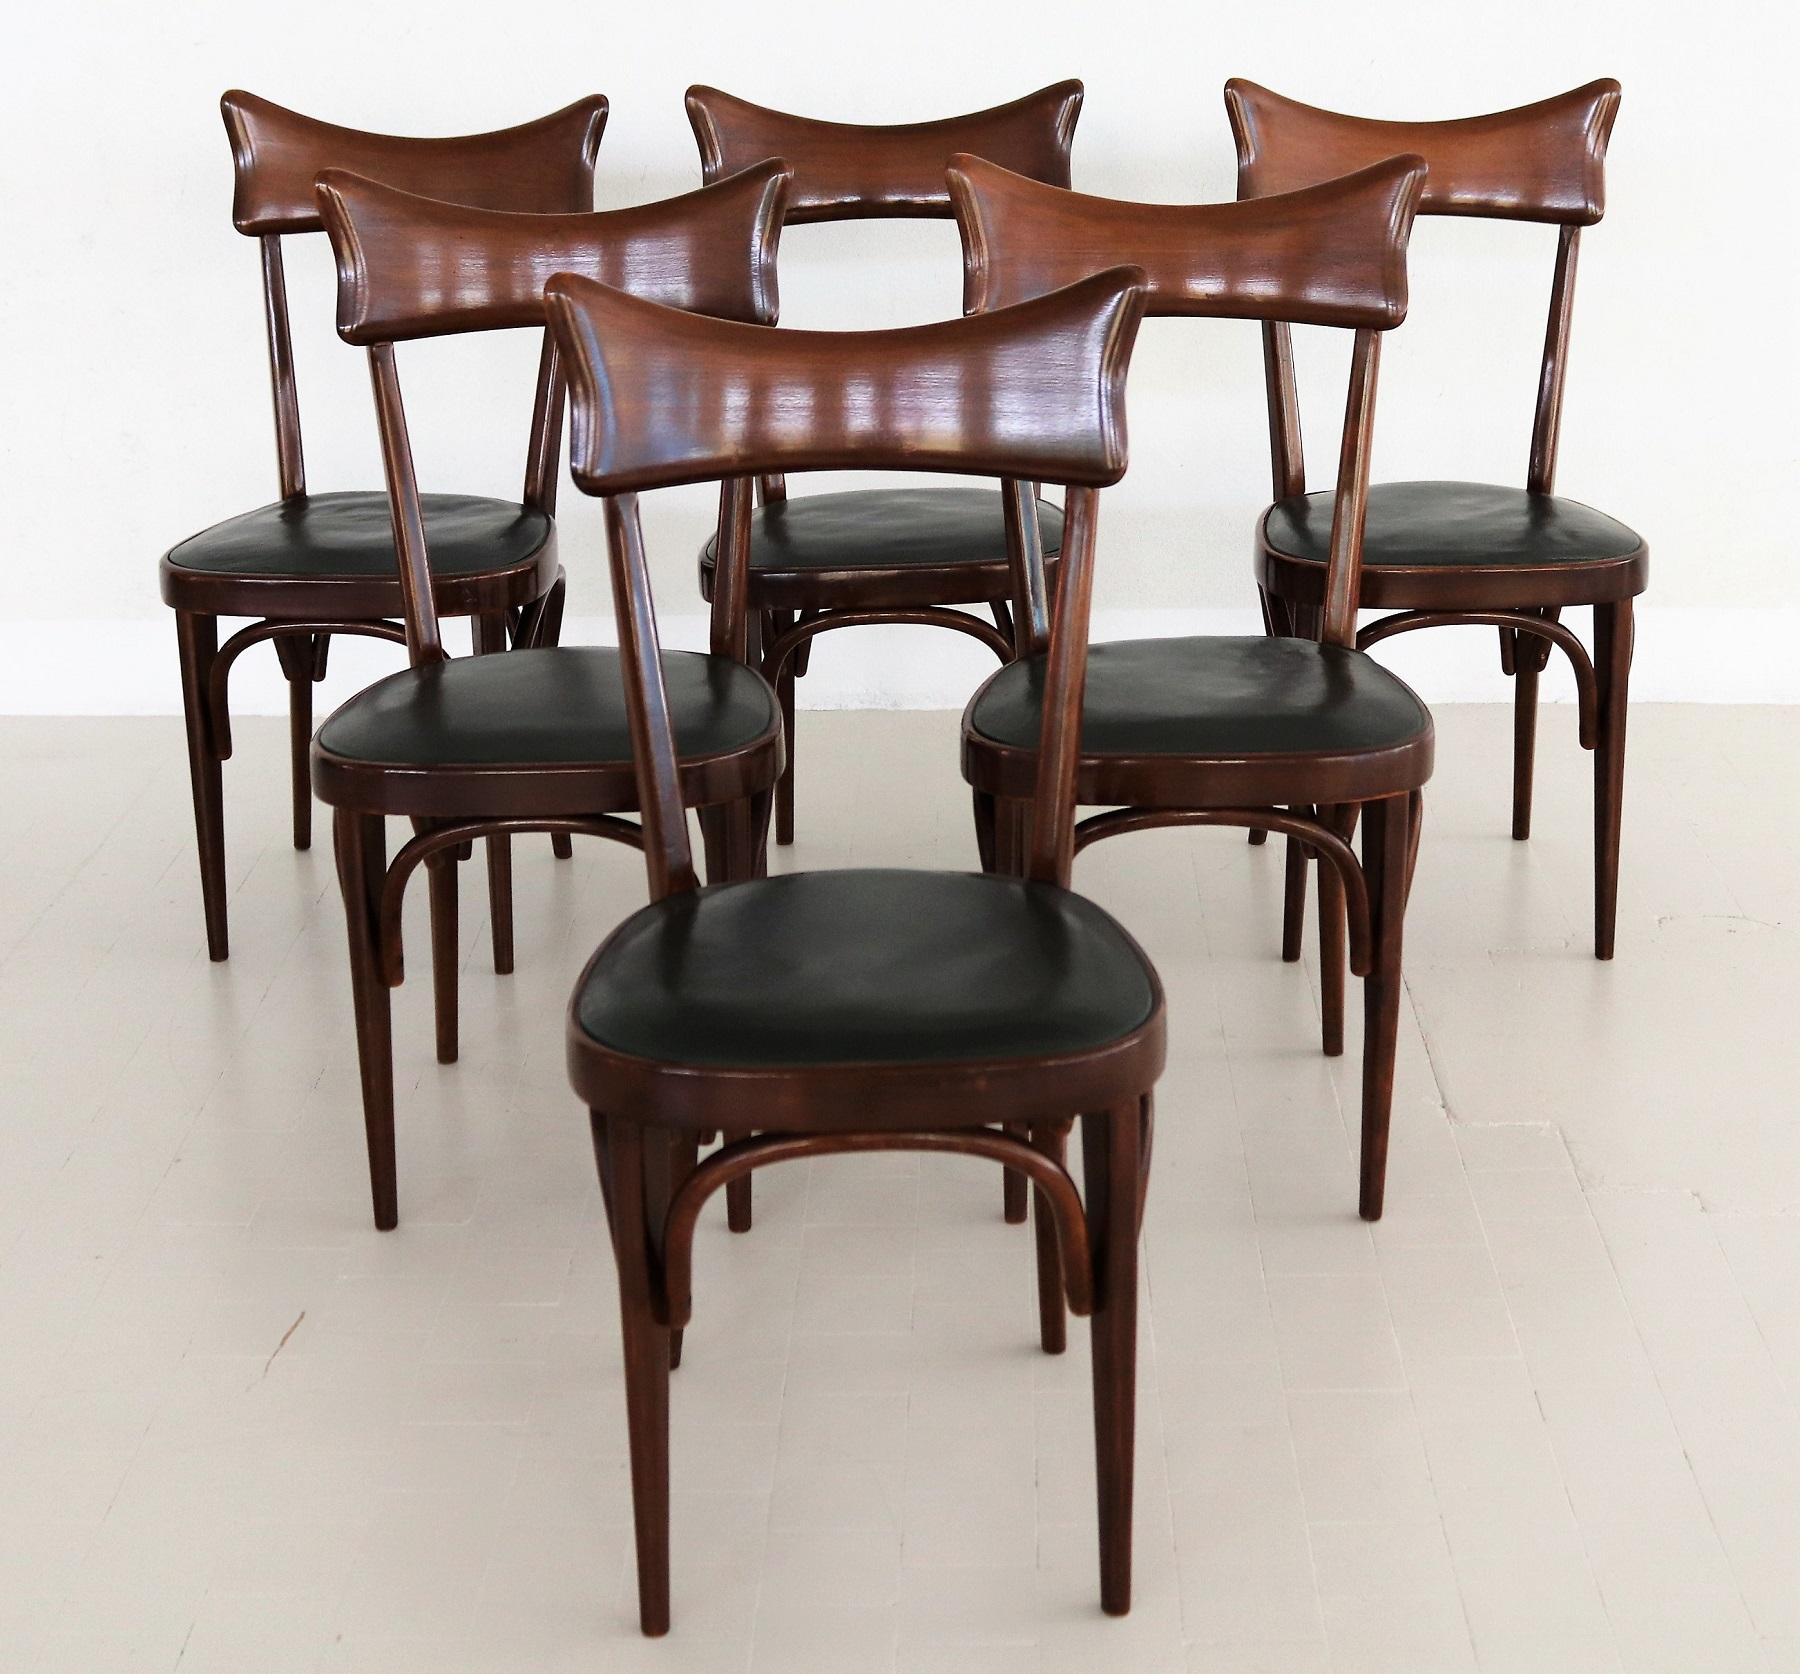 Beautiful original set of six dining room chairs made in Italy during the 1950s.
In the style of Ico Parisi.
The chairs are made of dark (mahogany) stained beech wood and are in original, dry condition. Not wormy, and not restored !
They are in